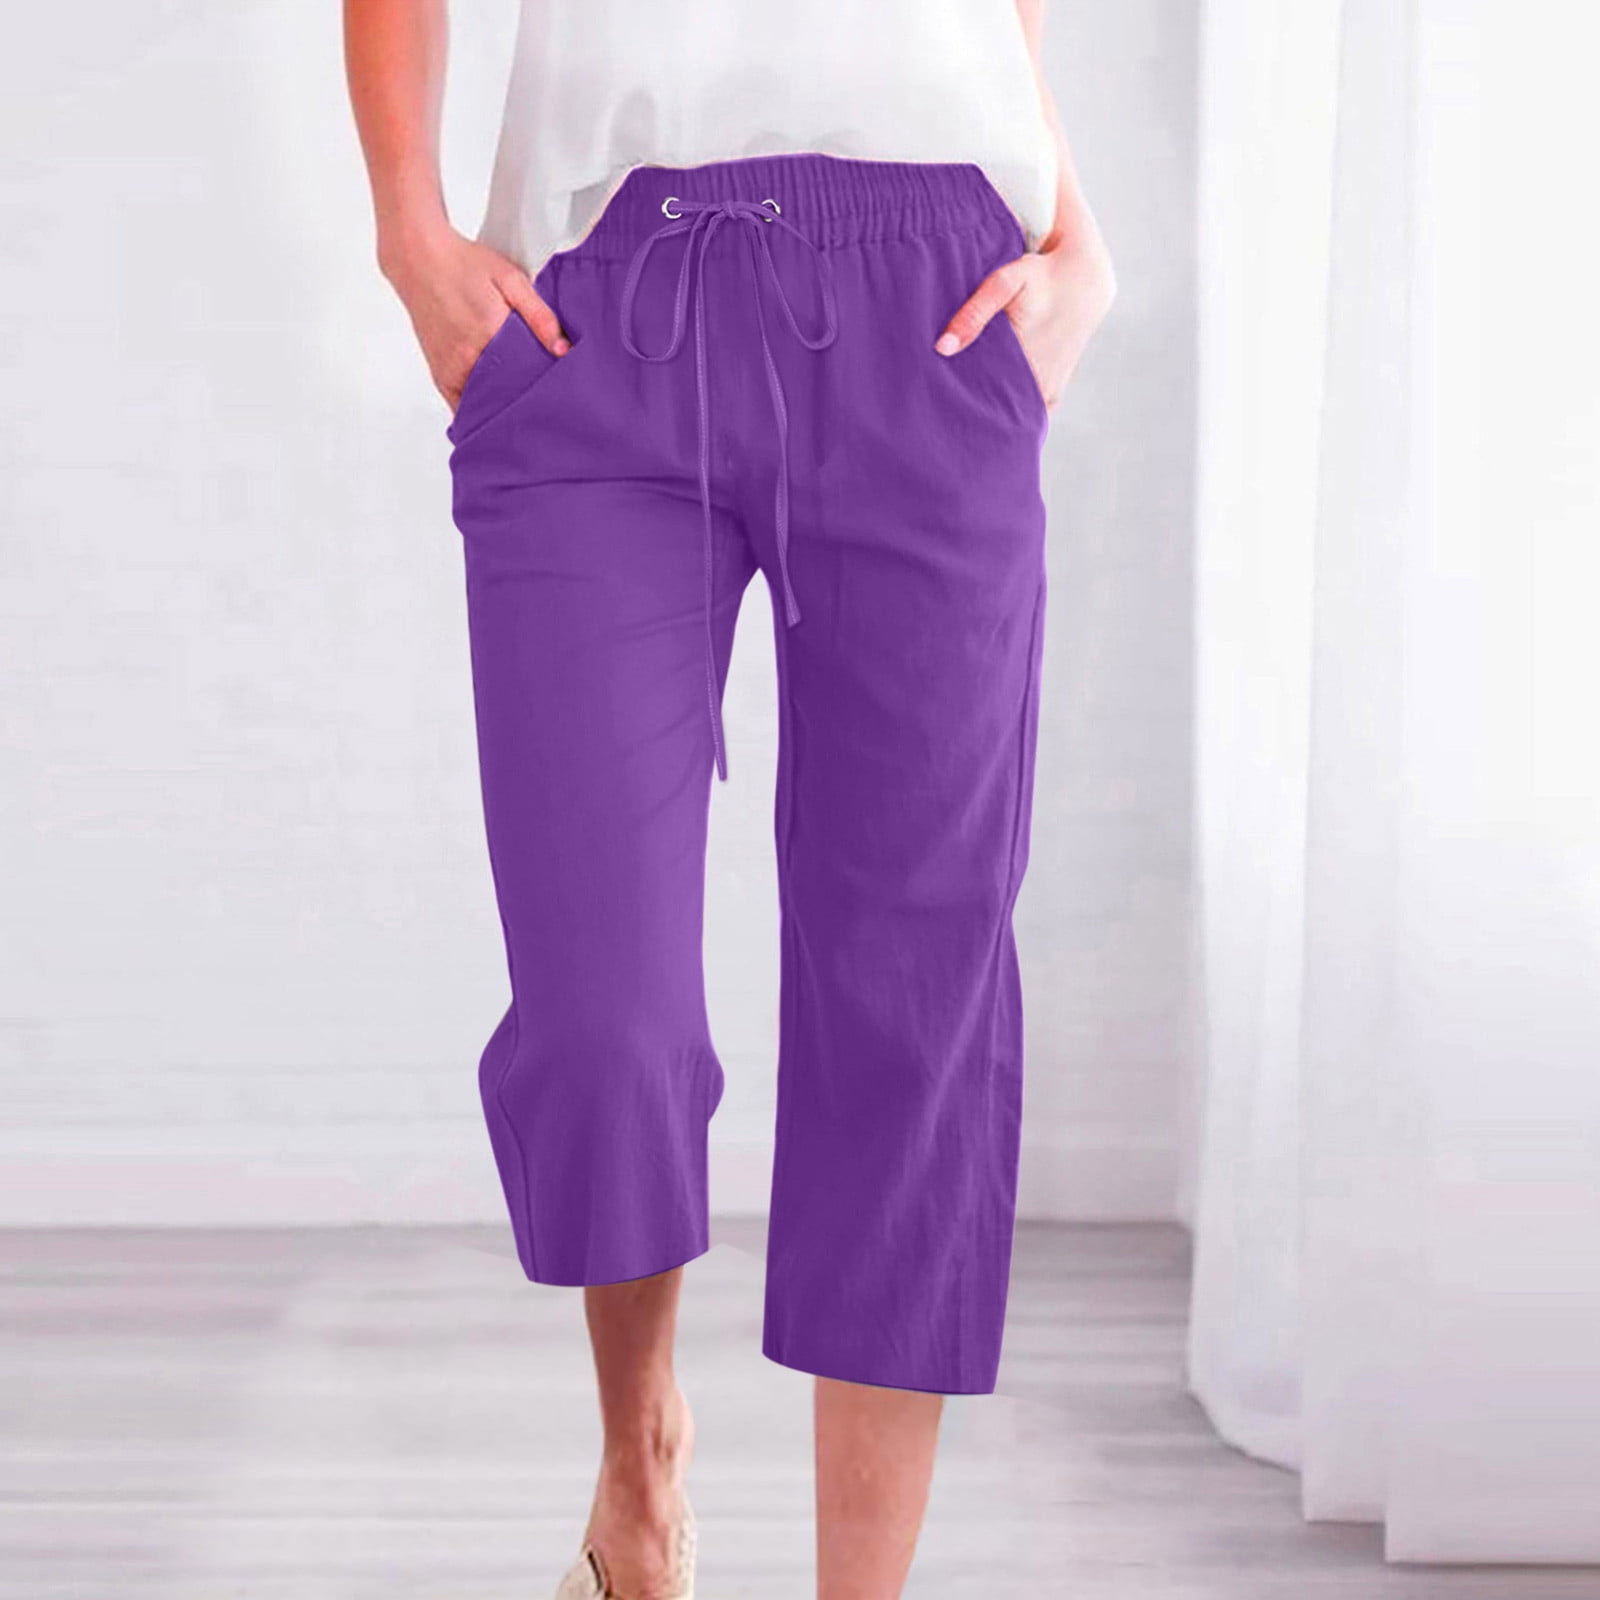 Clearance Stretchy Cropped Pants Fashion Casual Women Solid Span Ladies  High Waist Wide Leg Trousers Yoga Pants Capris Purple M